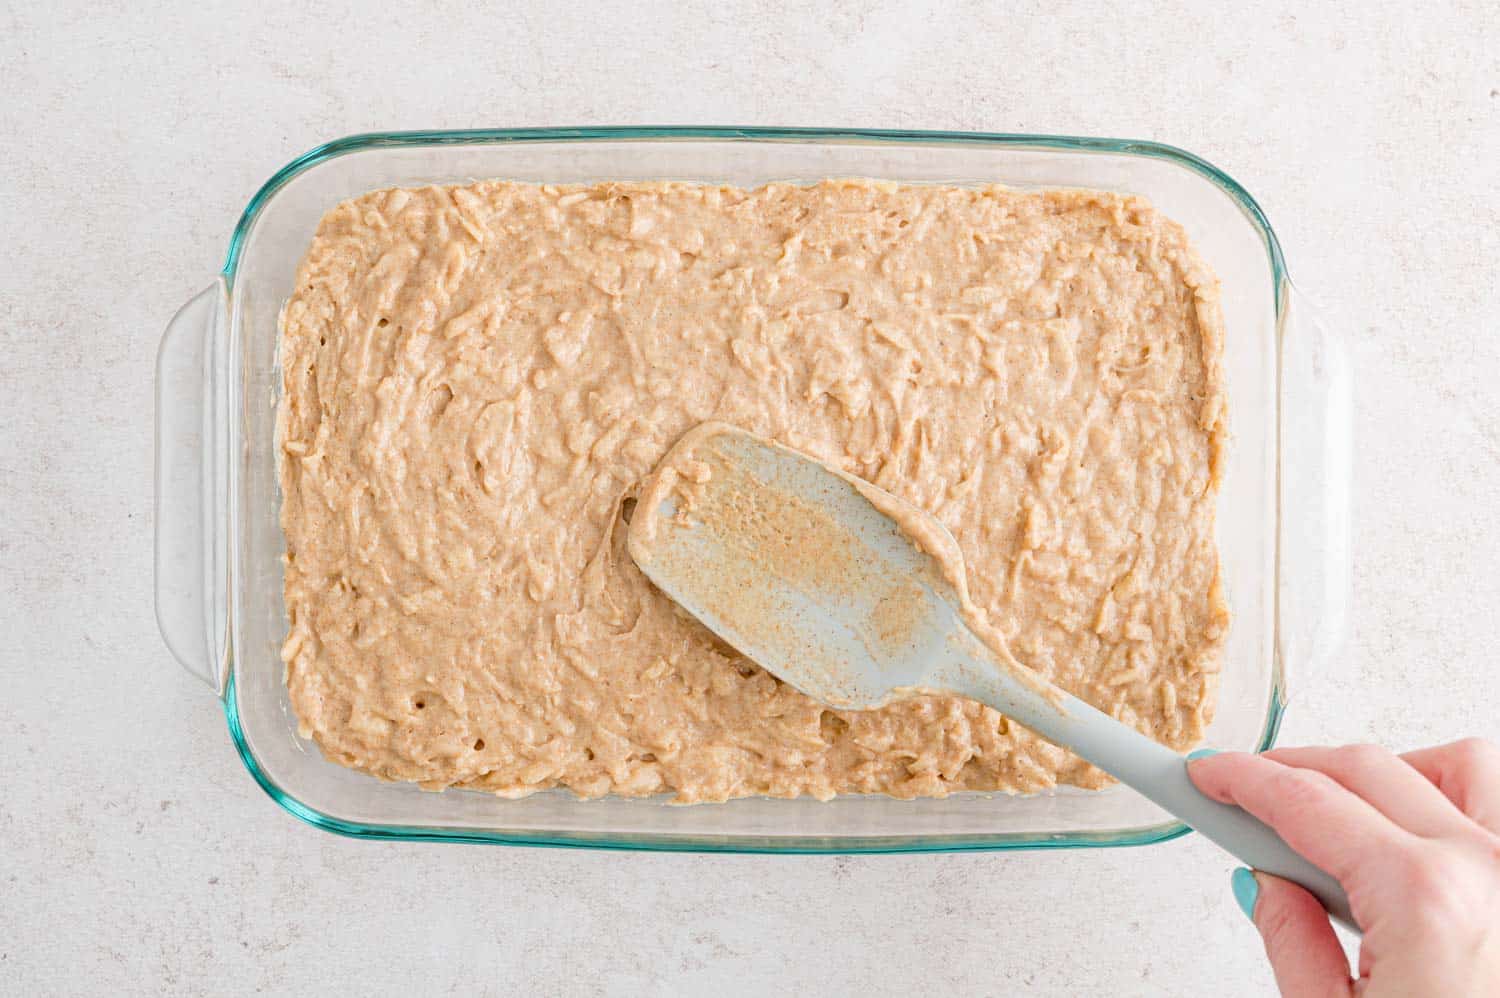 Apple spice cake batter being spread into a glass baking dish.